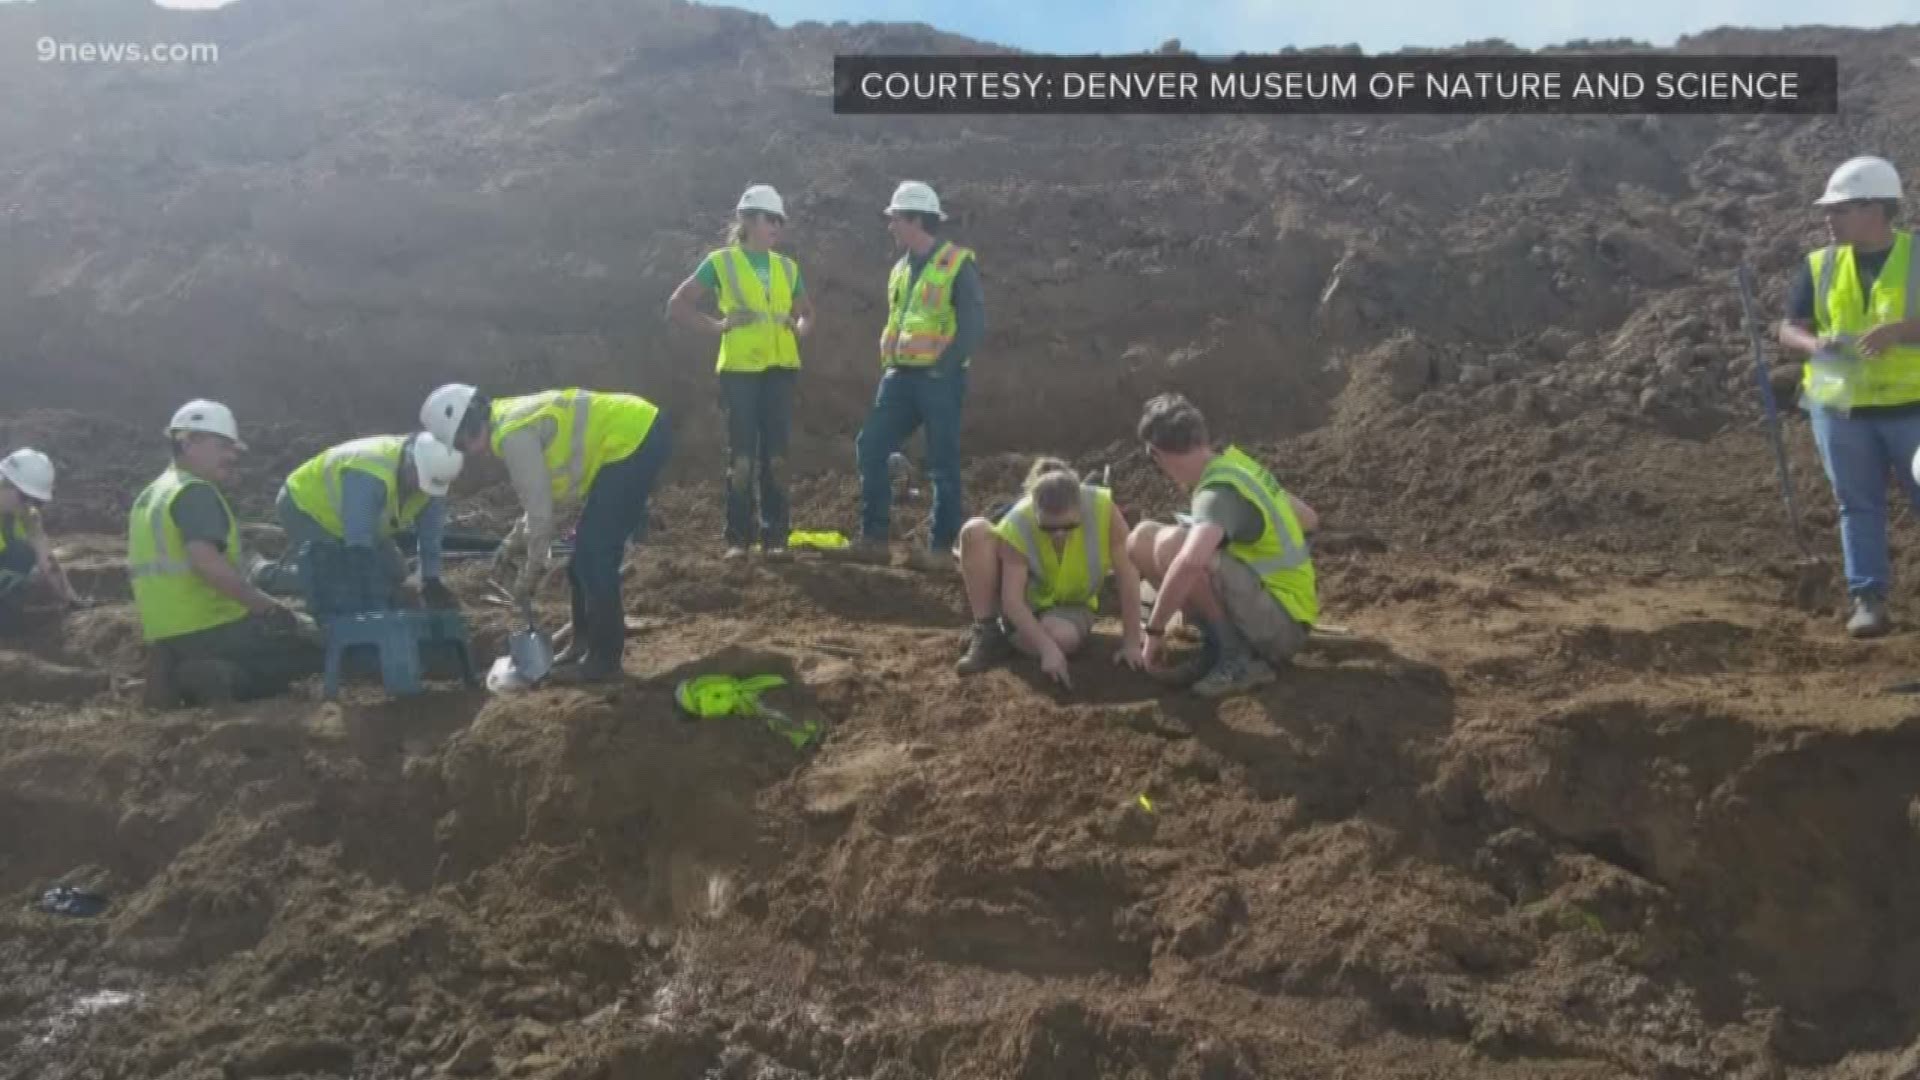 An expert from the Denver Museum of Nature and Science discusses the recent discovery of dinosaur bones at a construction site in Highlands Ranch.